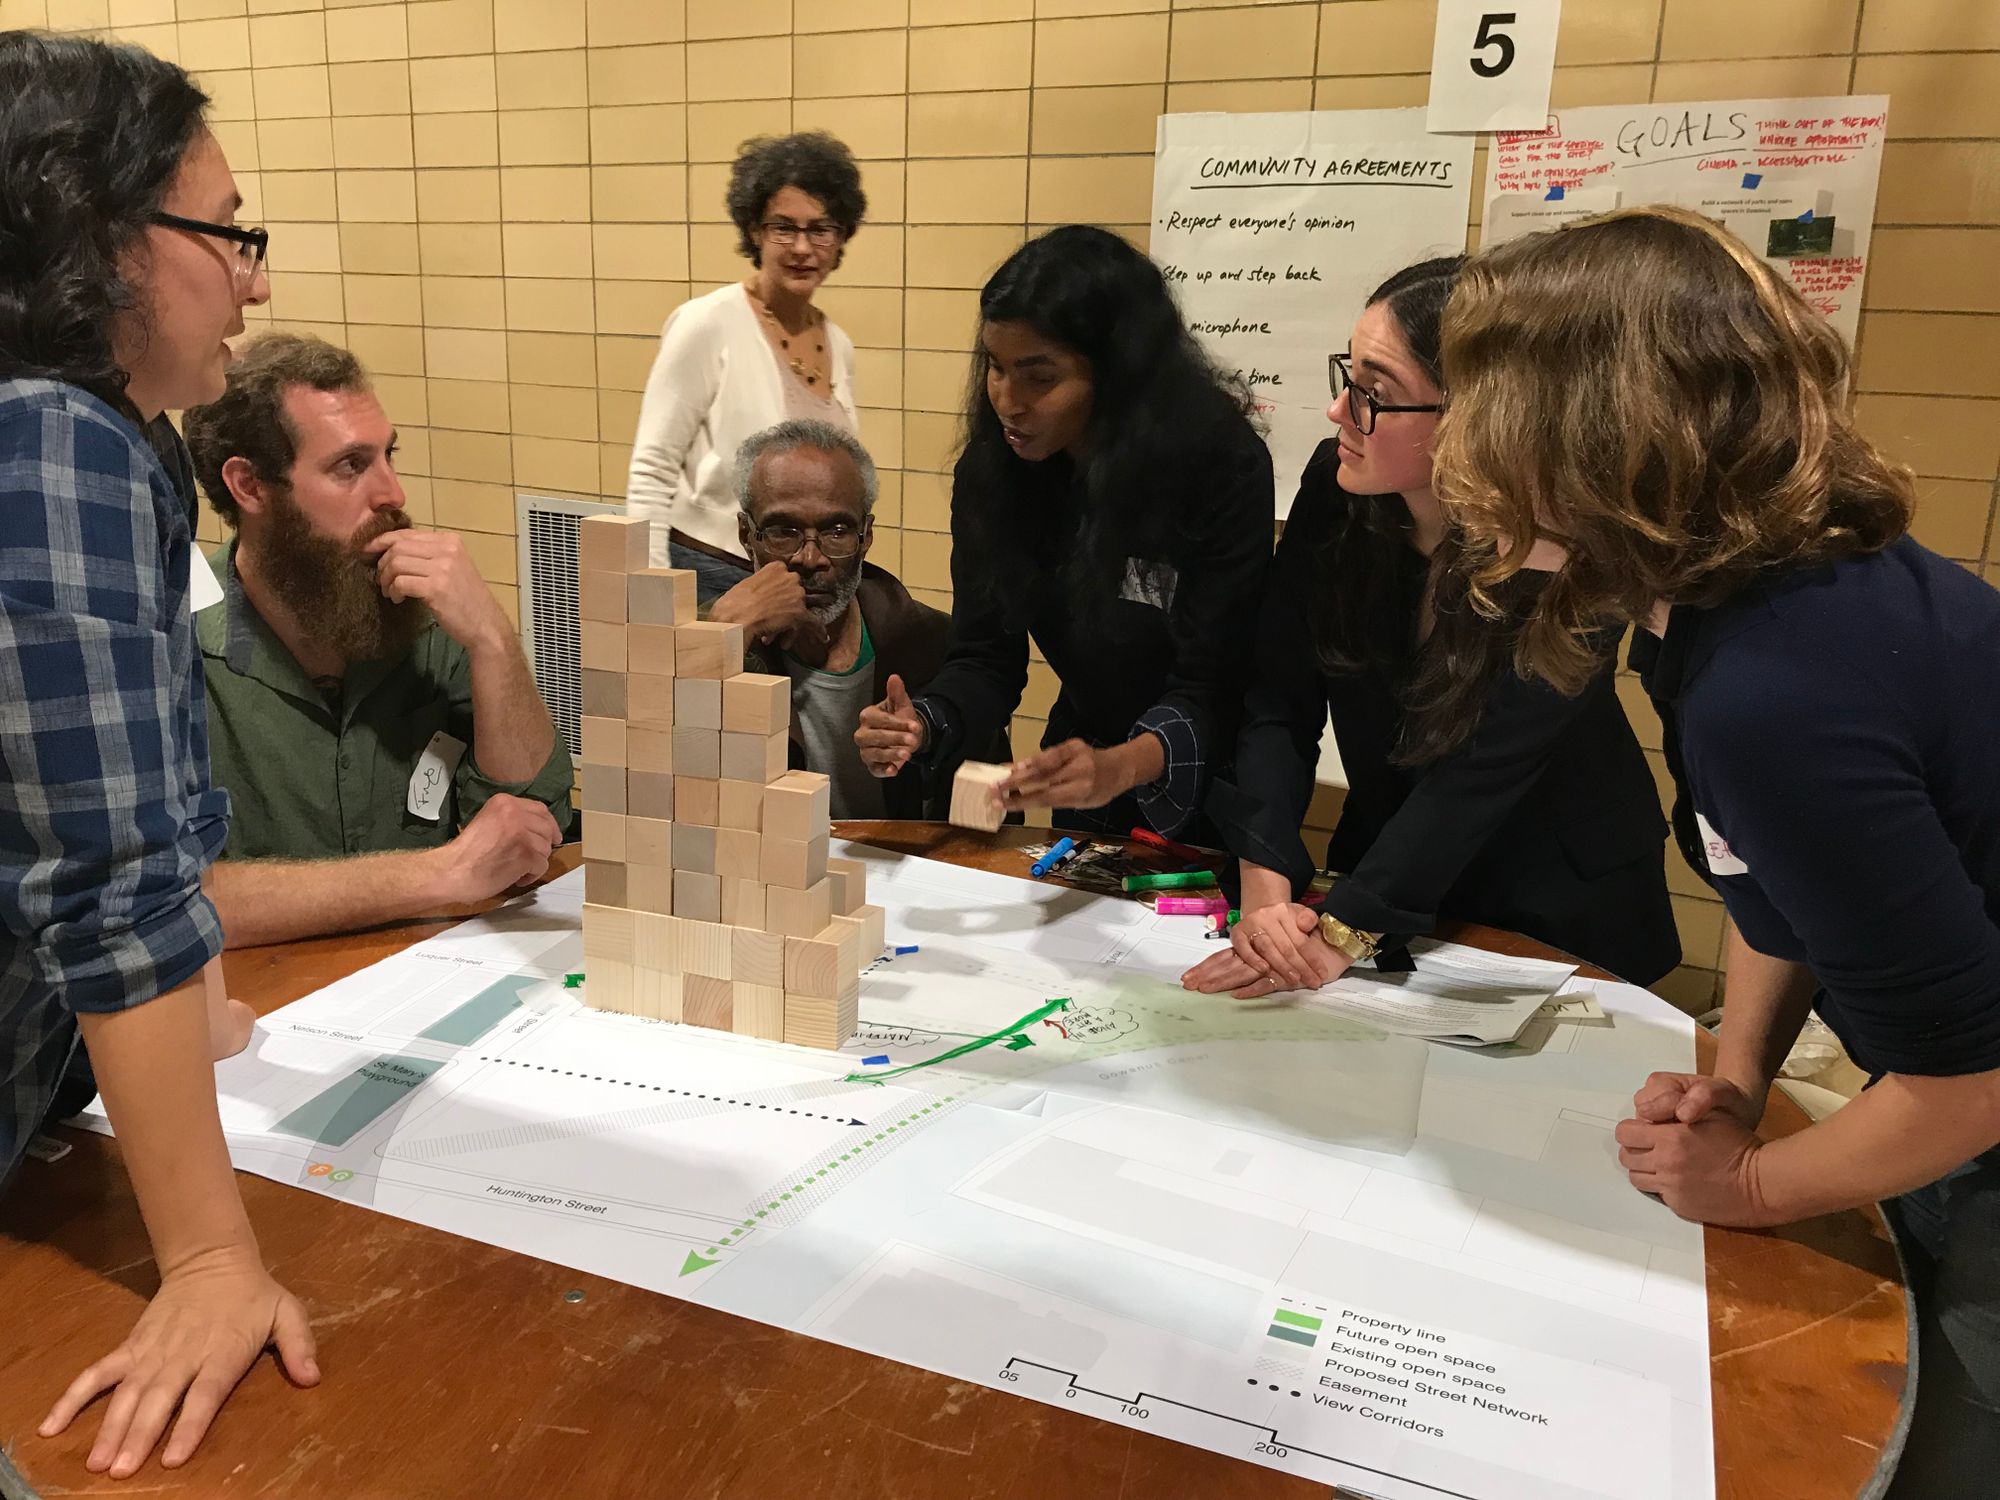 Public Place Community Workshop: Some Opposition To The 100% Affordable Project